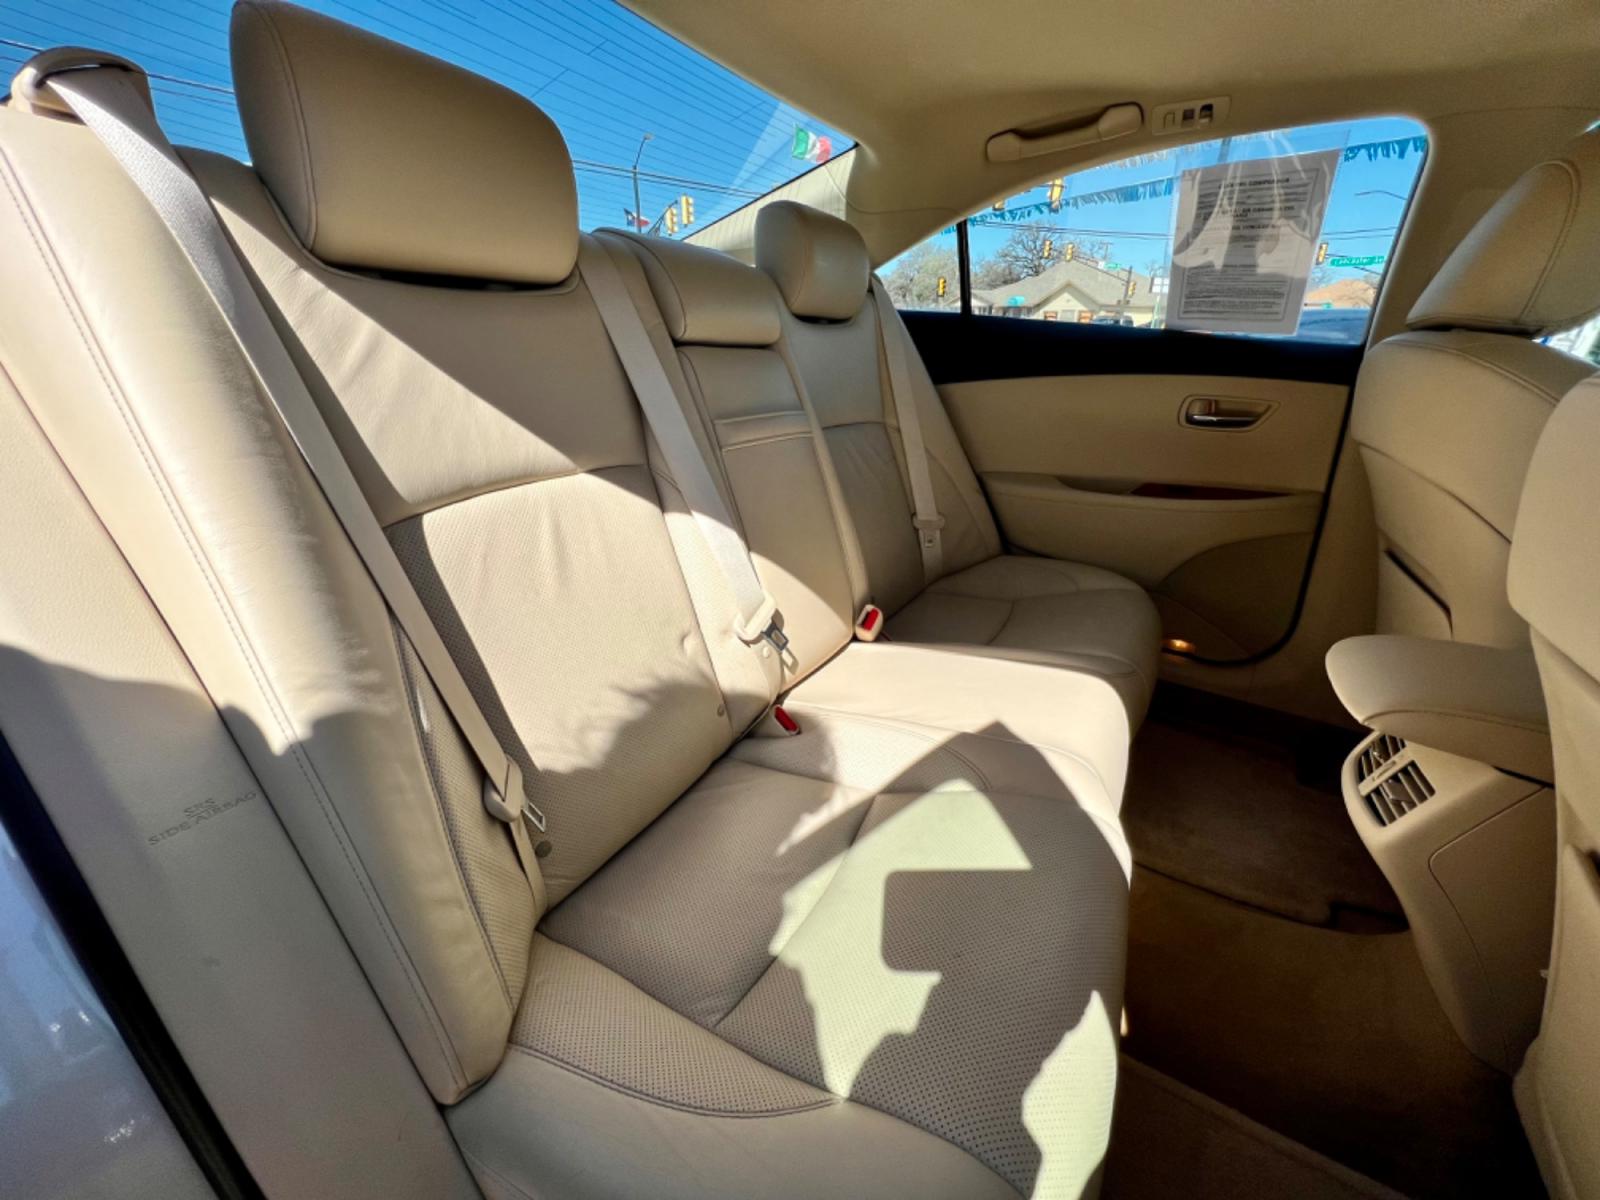 2011 GOLD LEXUS ES 350 (JTHBK1EG9B2) , located at 5900 E. Lancaster Ave., Fort Worth, TX, 76112, (817) 457-5456, 0.000000, 0.000000 - This is a 1 OWNER, 2011 LEXUS ES 350 4 DOOR SEDAN that is in excellent condition. There are no dents or scratches. The interior is clean with no rips or tears or stains. All power windows, door locks and seats. Ice cold AC for those hot Texas summer days. It is equipped with a CD player, AM/FM radio - Photo #13